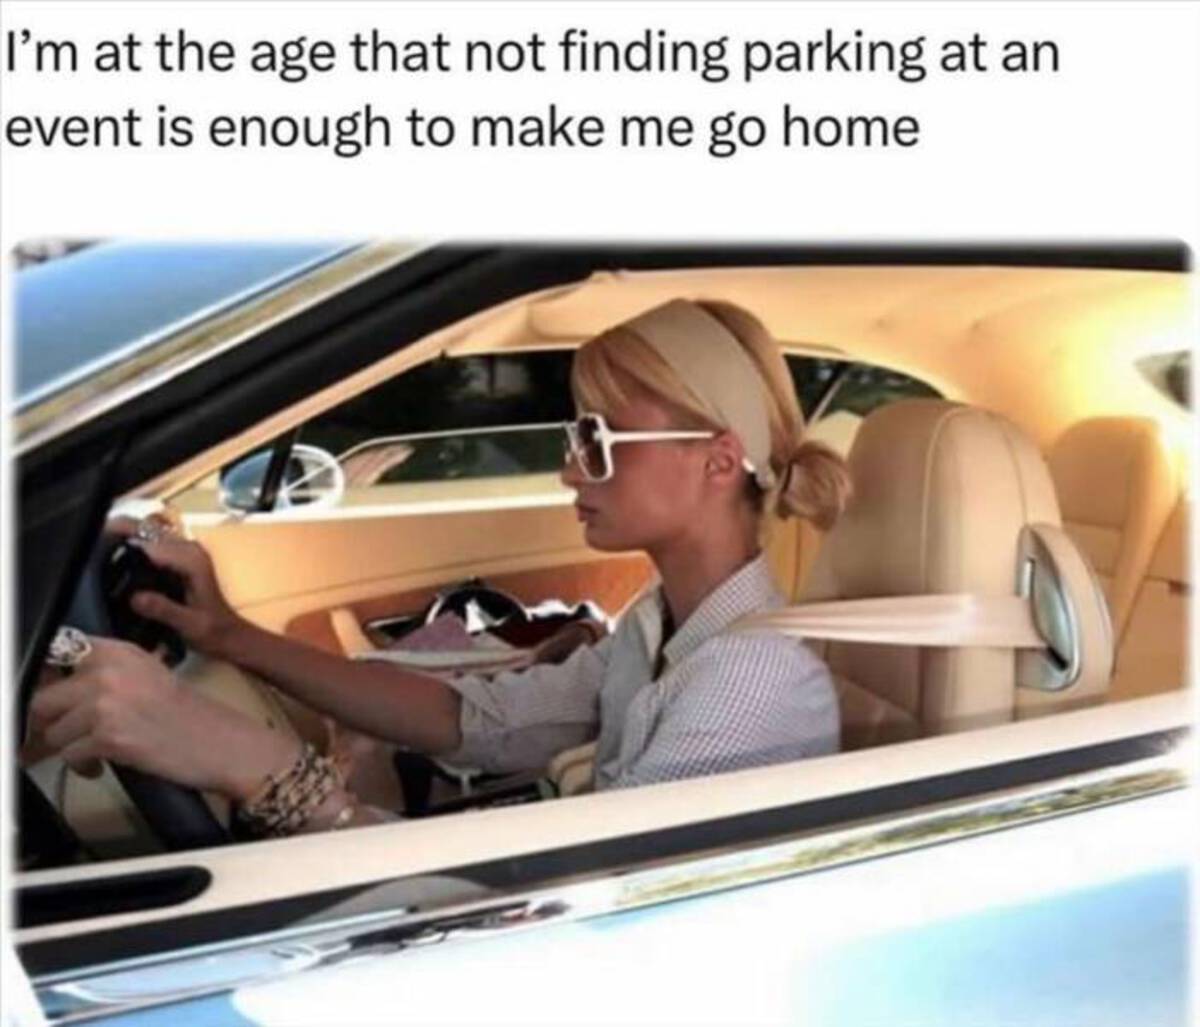 I'm at the age that not finding parking at an event is enough to make me go home